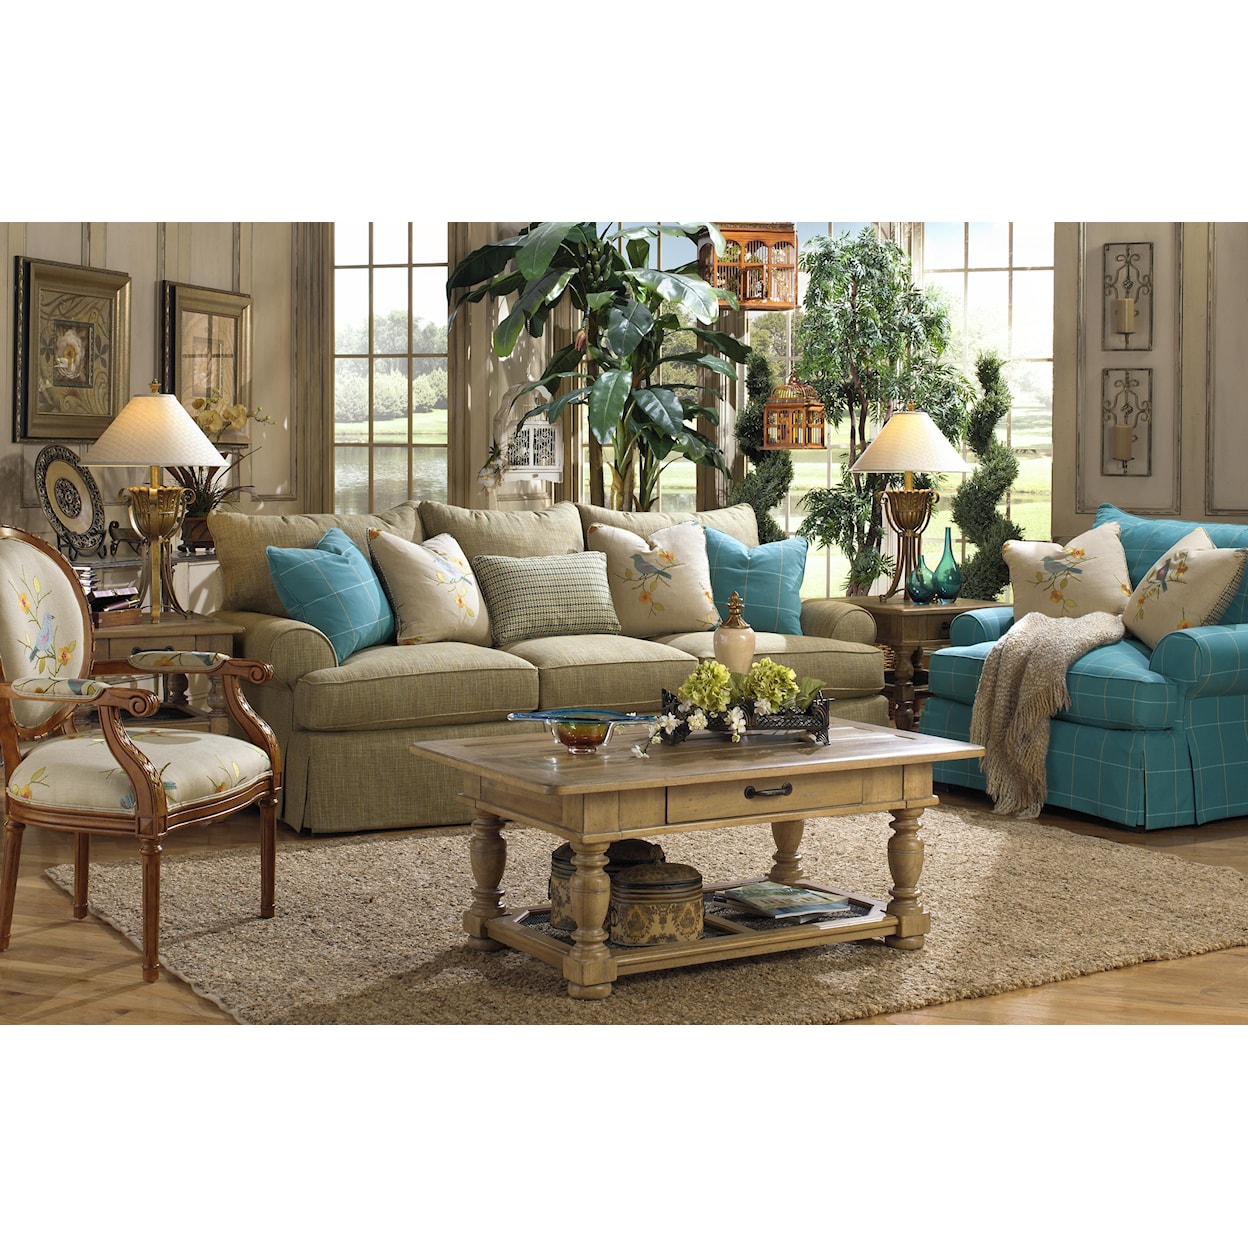 Paula Deen by Craftmaster P997000 Stationary Living Room Group